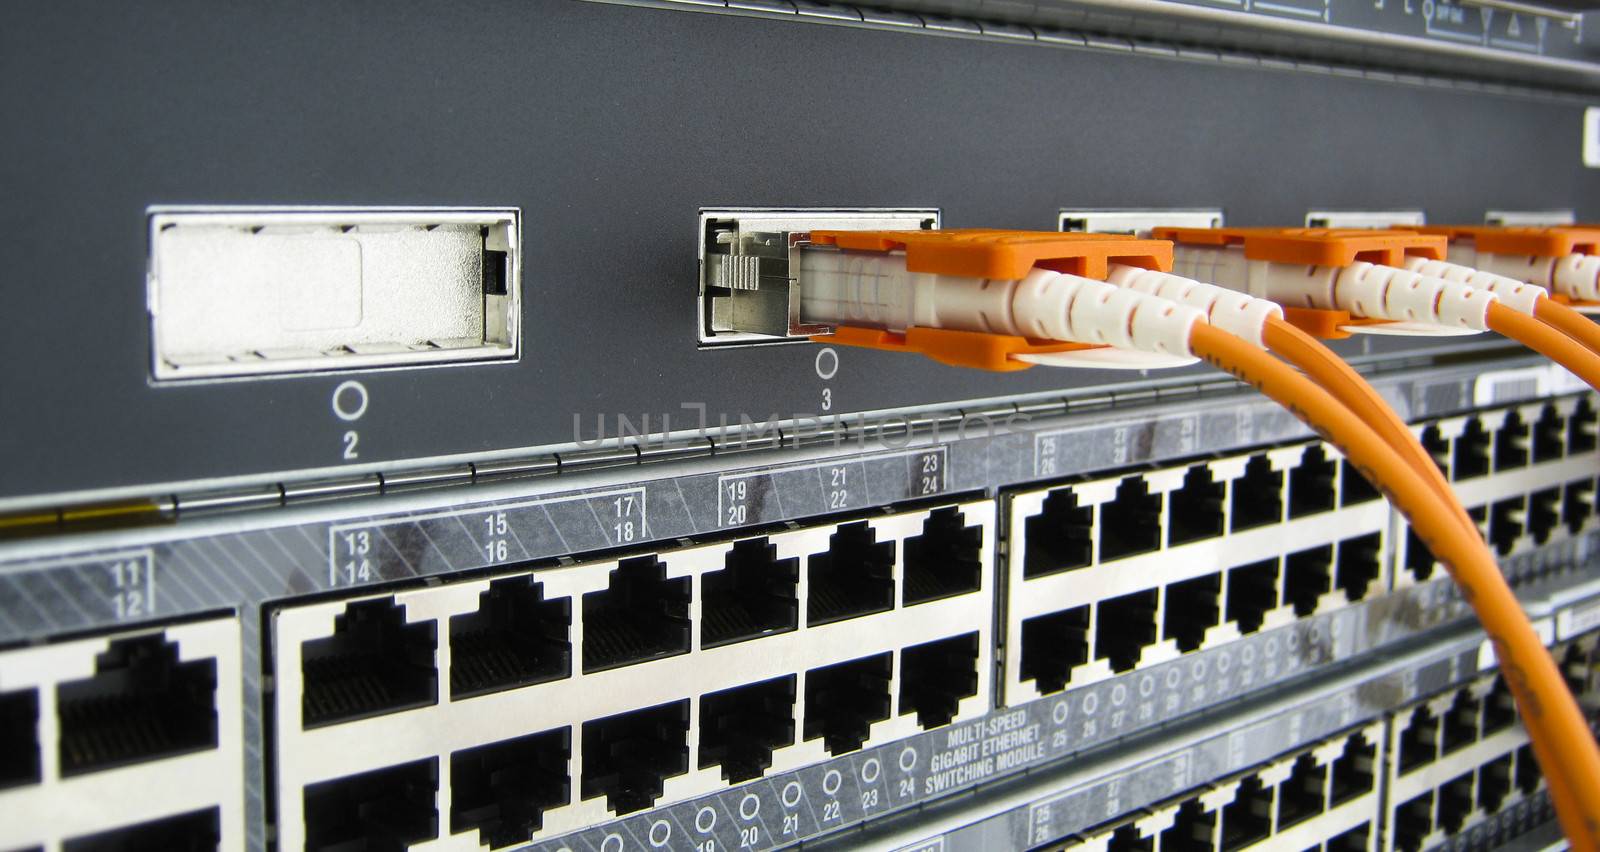 GBIC optic fiber communications equipment installed in a large datacenter.